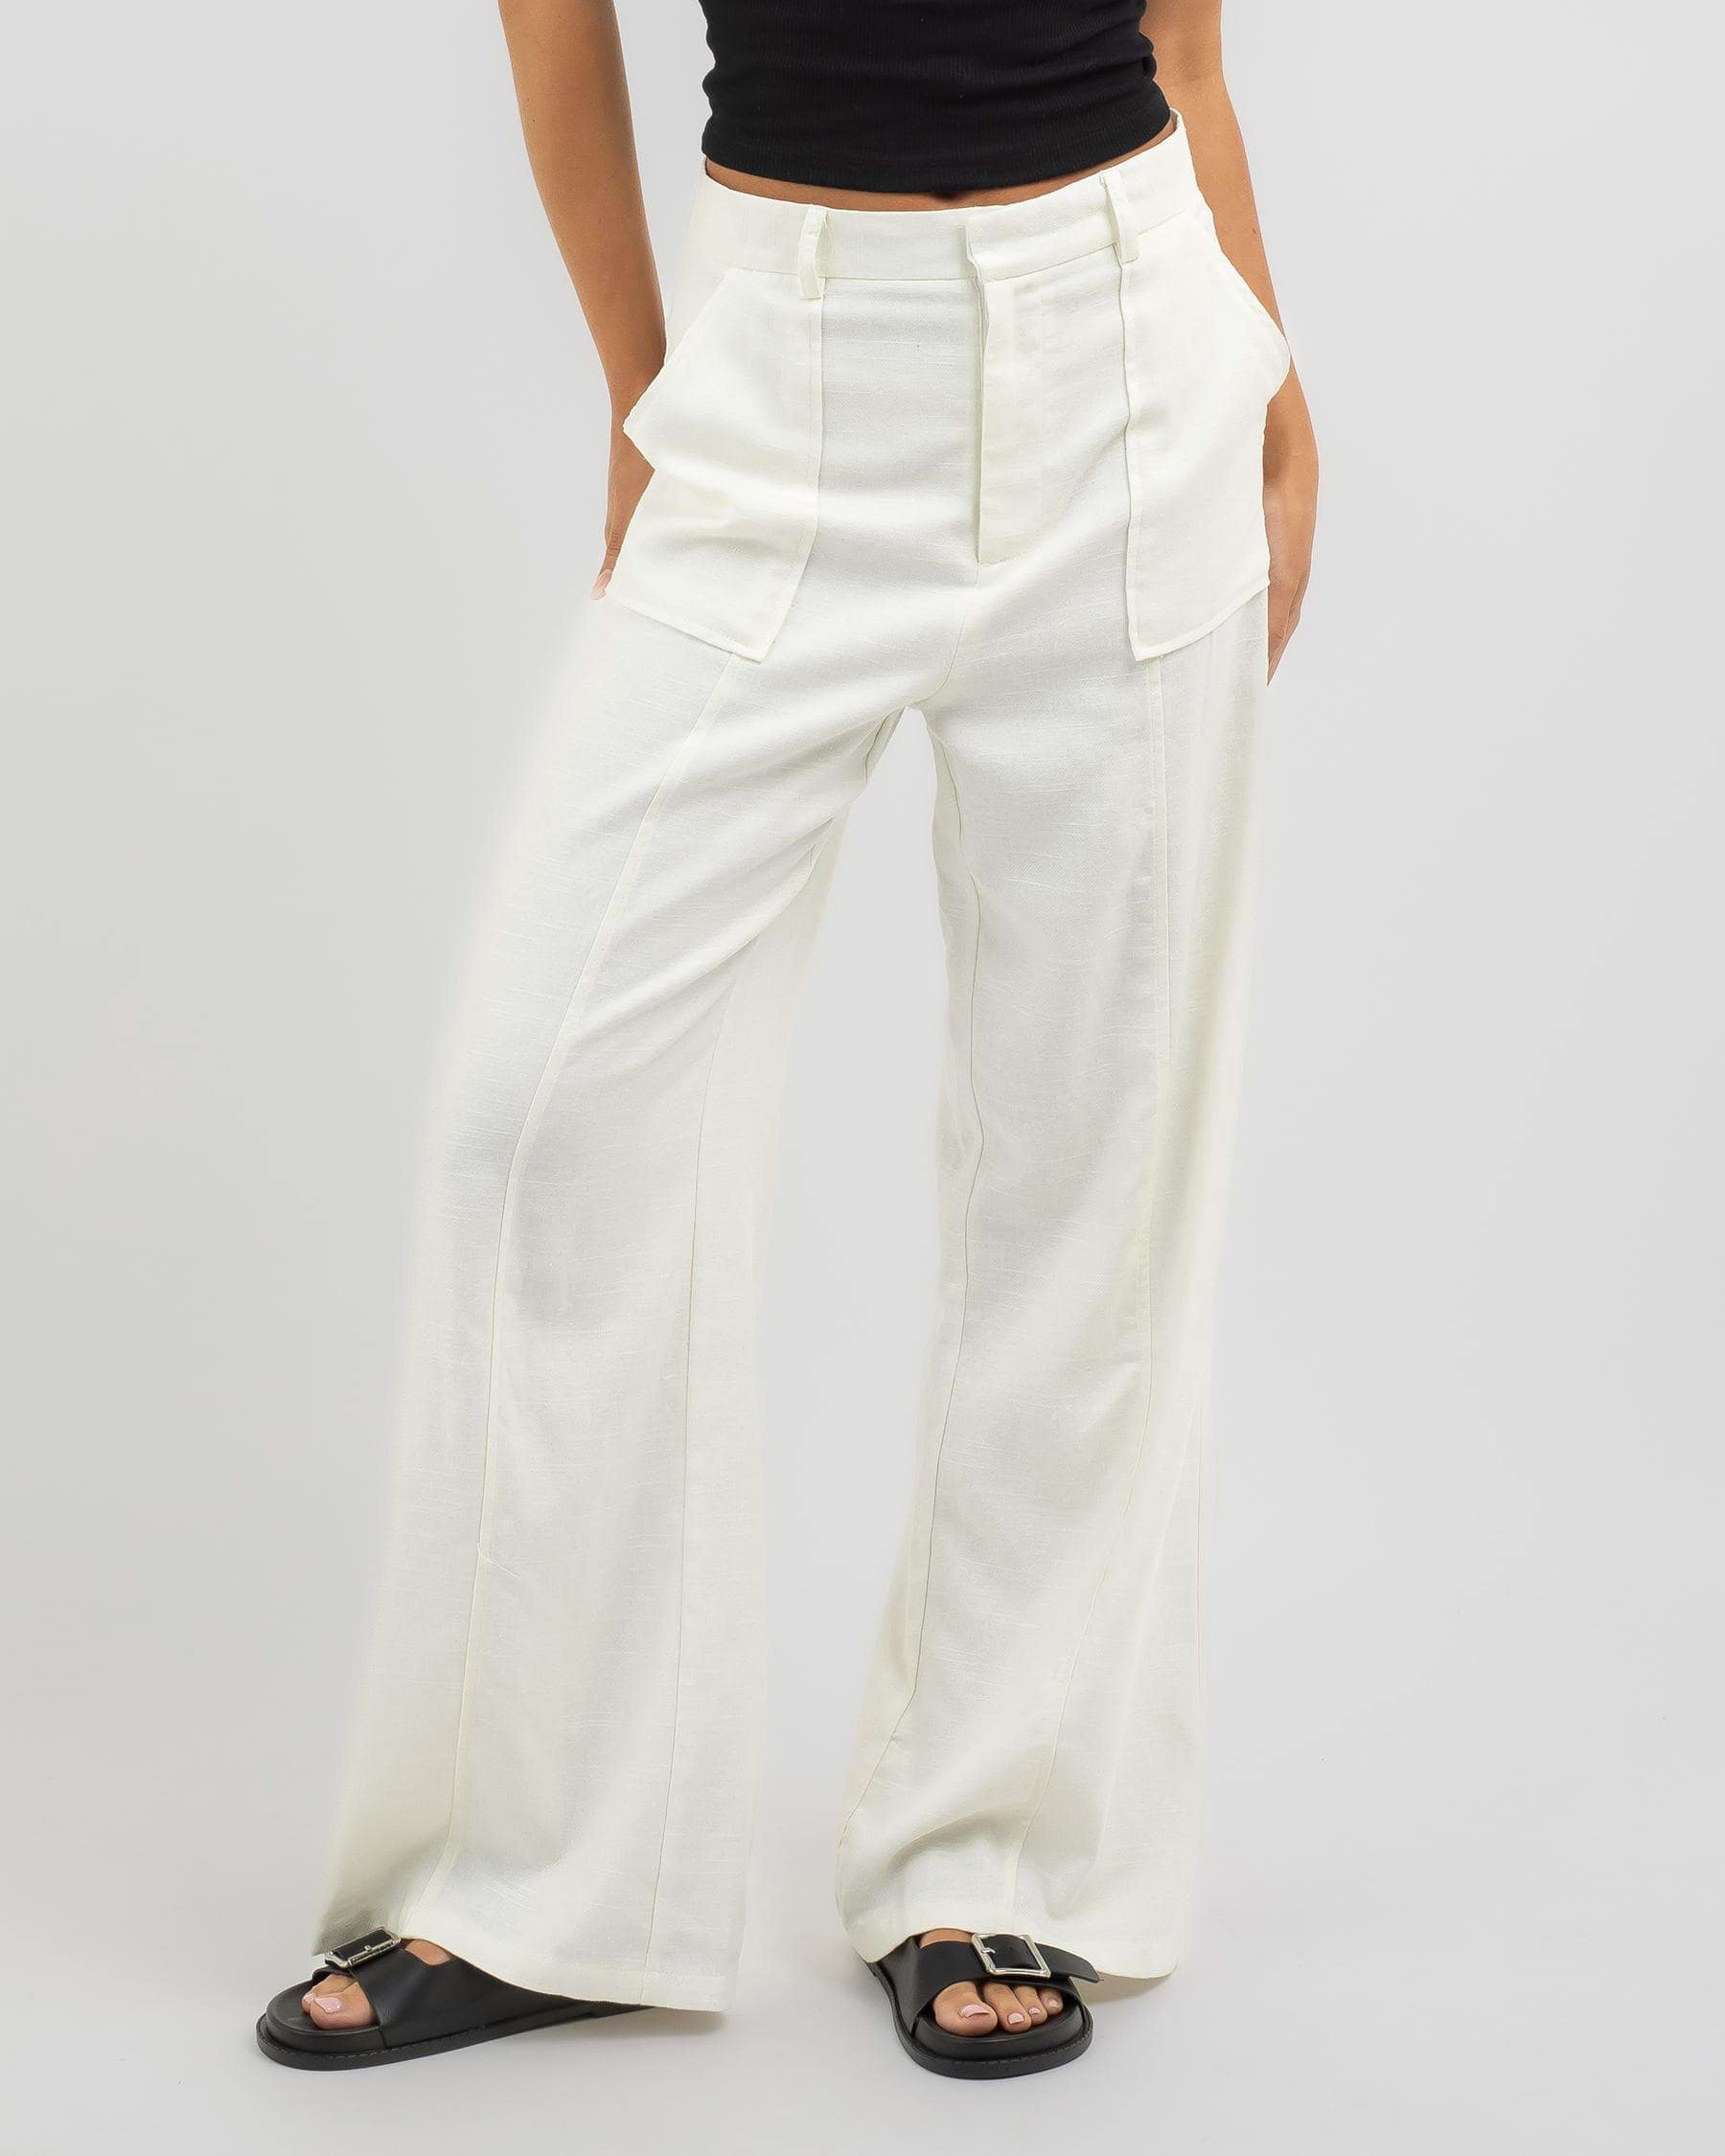 Shop YH & Co Mina Pants In White - Fast Shipping & Easy Returns - City ...